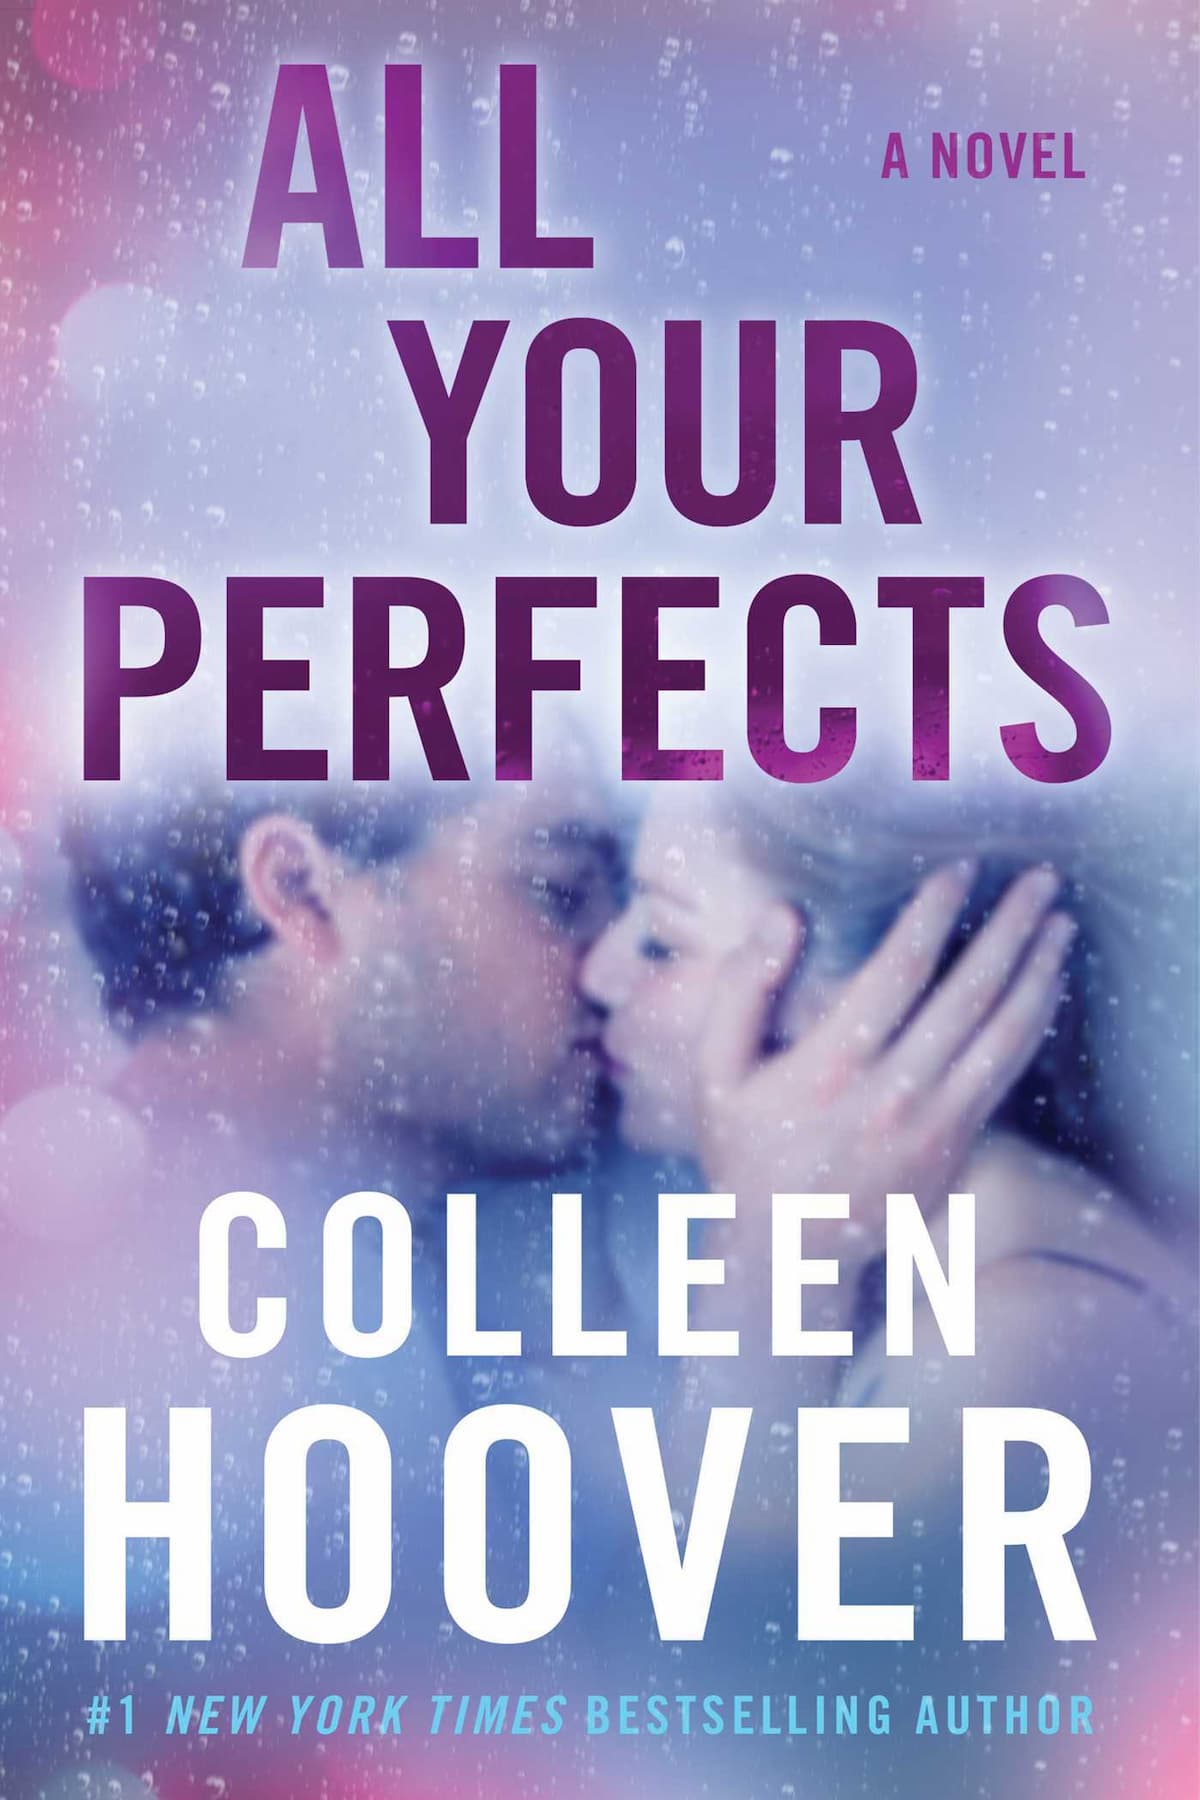 Colleen Hoover Books In Order, Contemporary Romance, Fiction, New Adult Romance, Romance, Romantic Comedy, Women's Fiction, All Your Perfects - Colleen Hoover